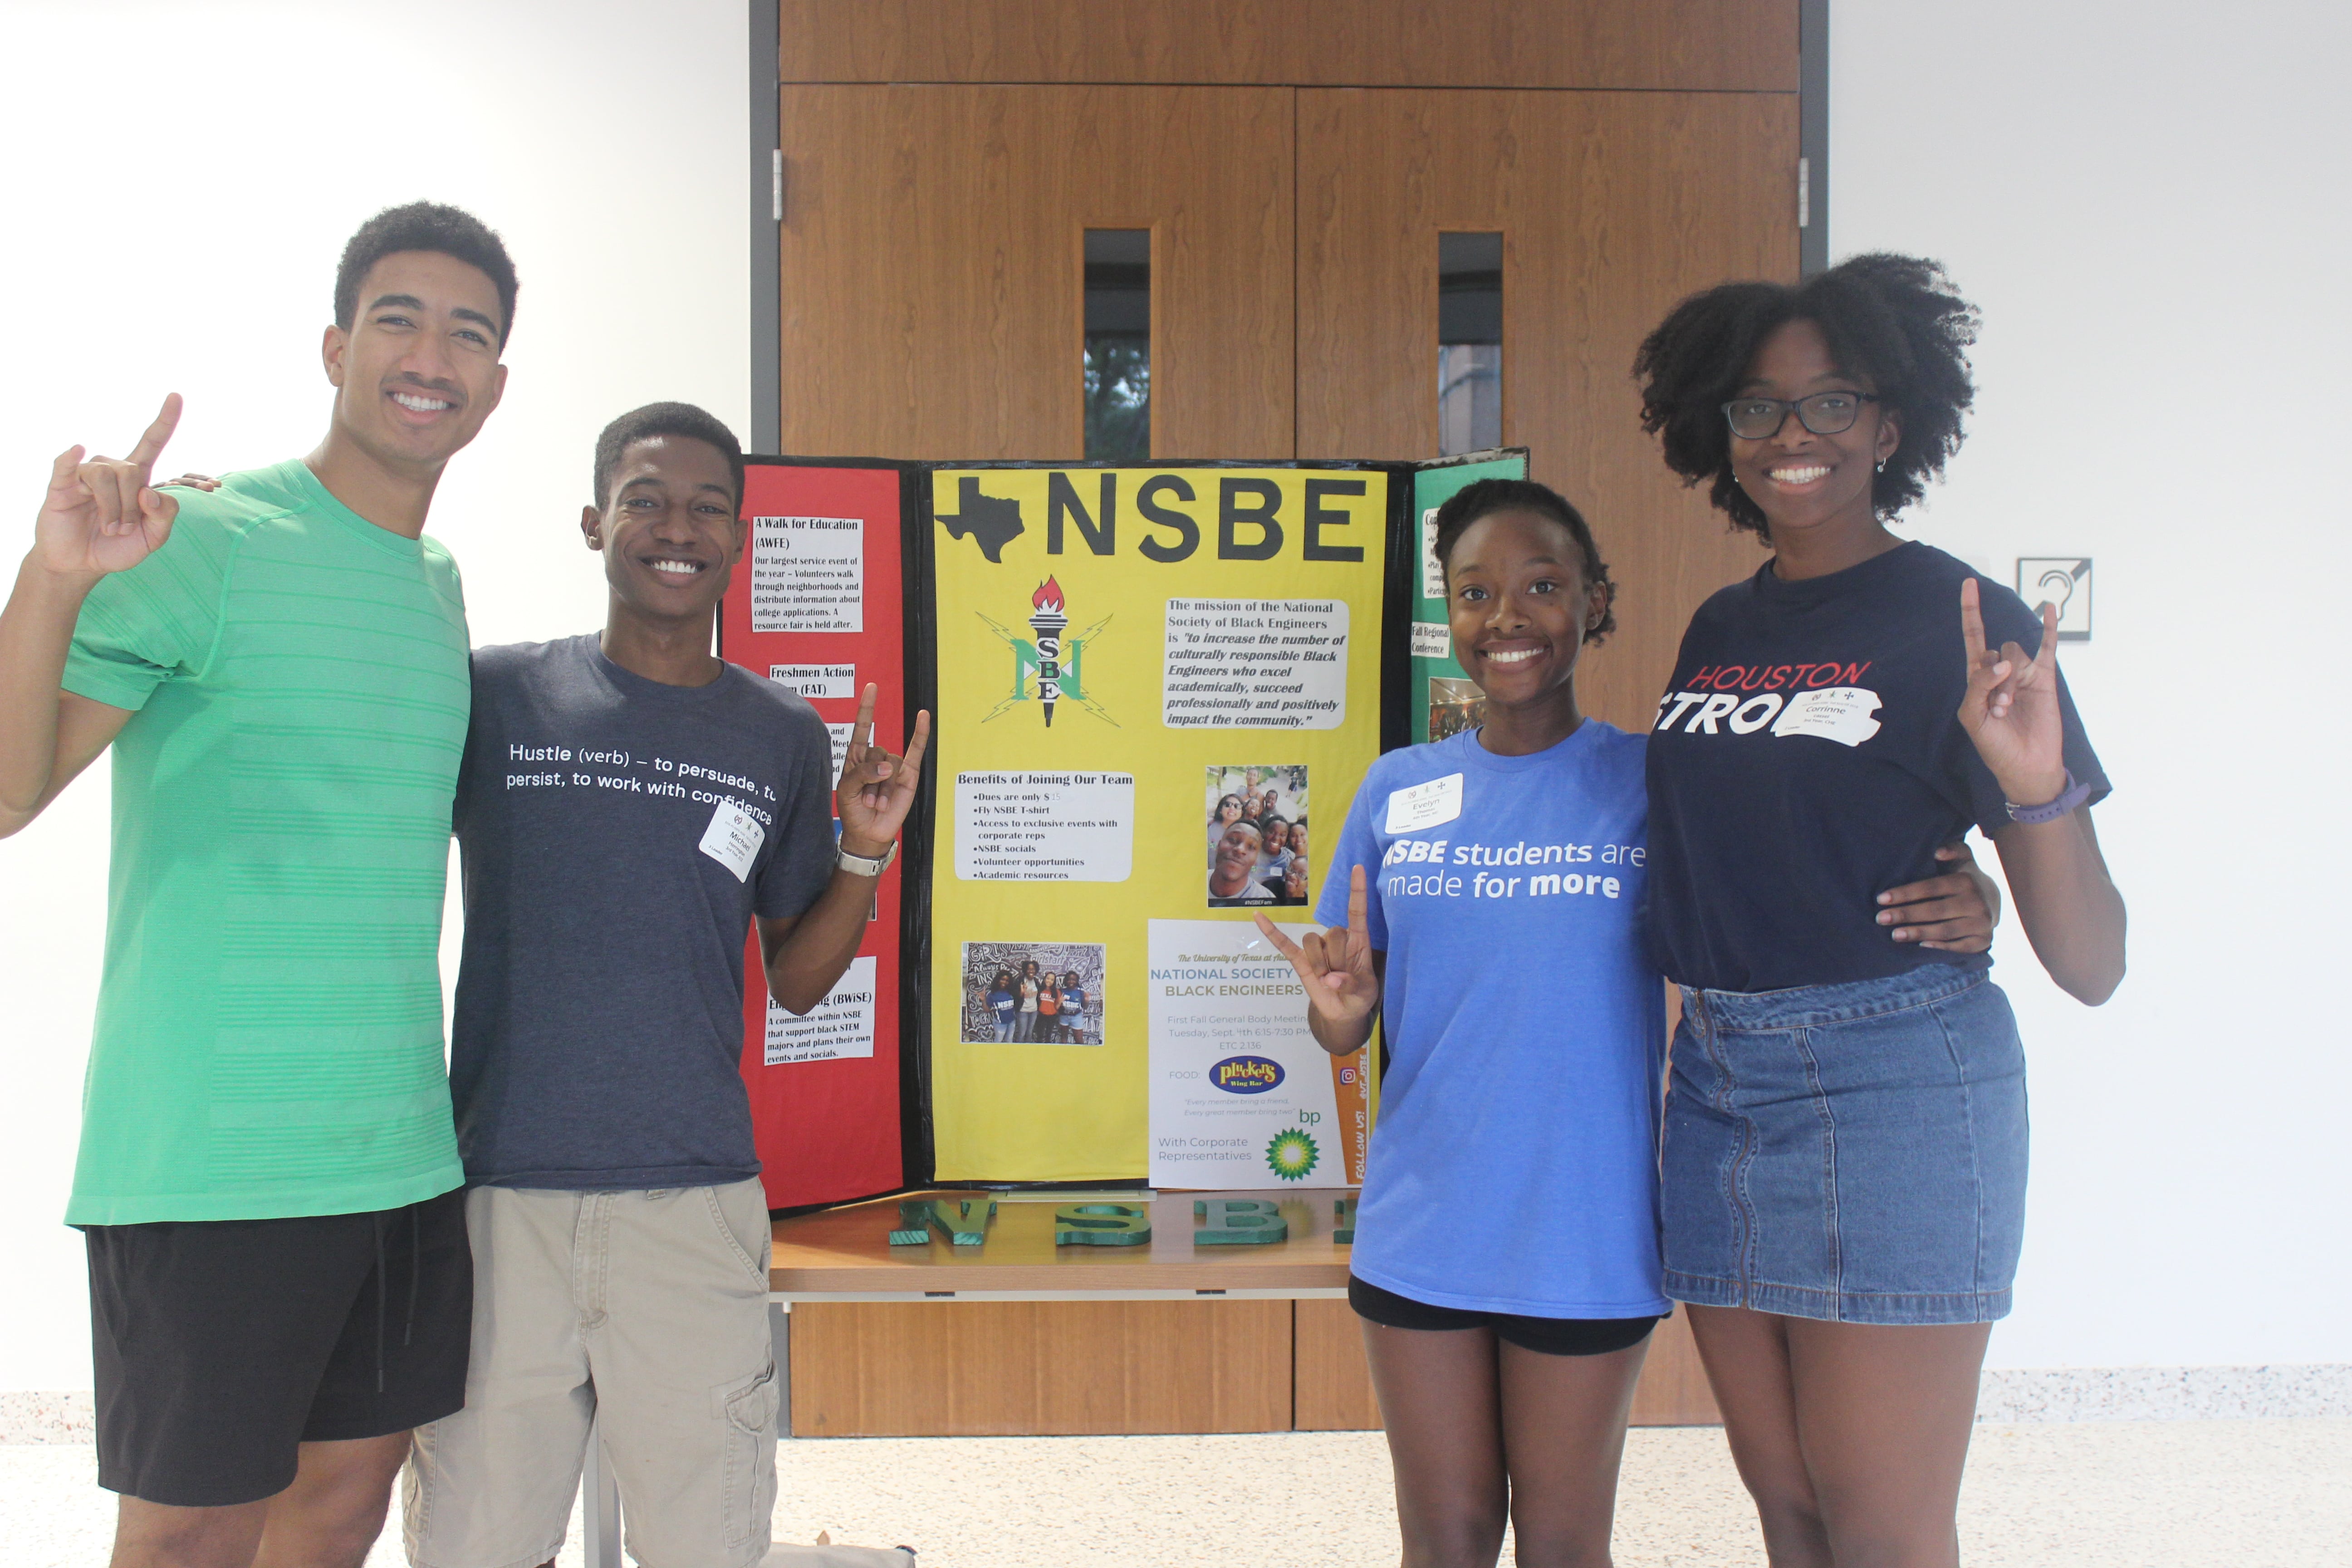 NSBE students smiling